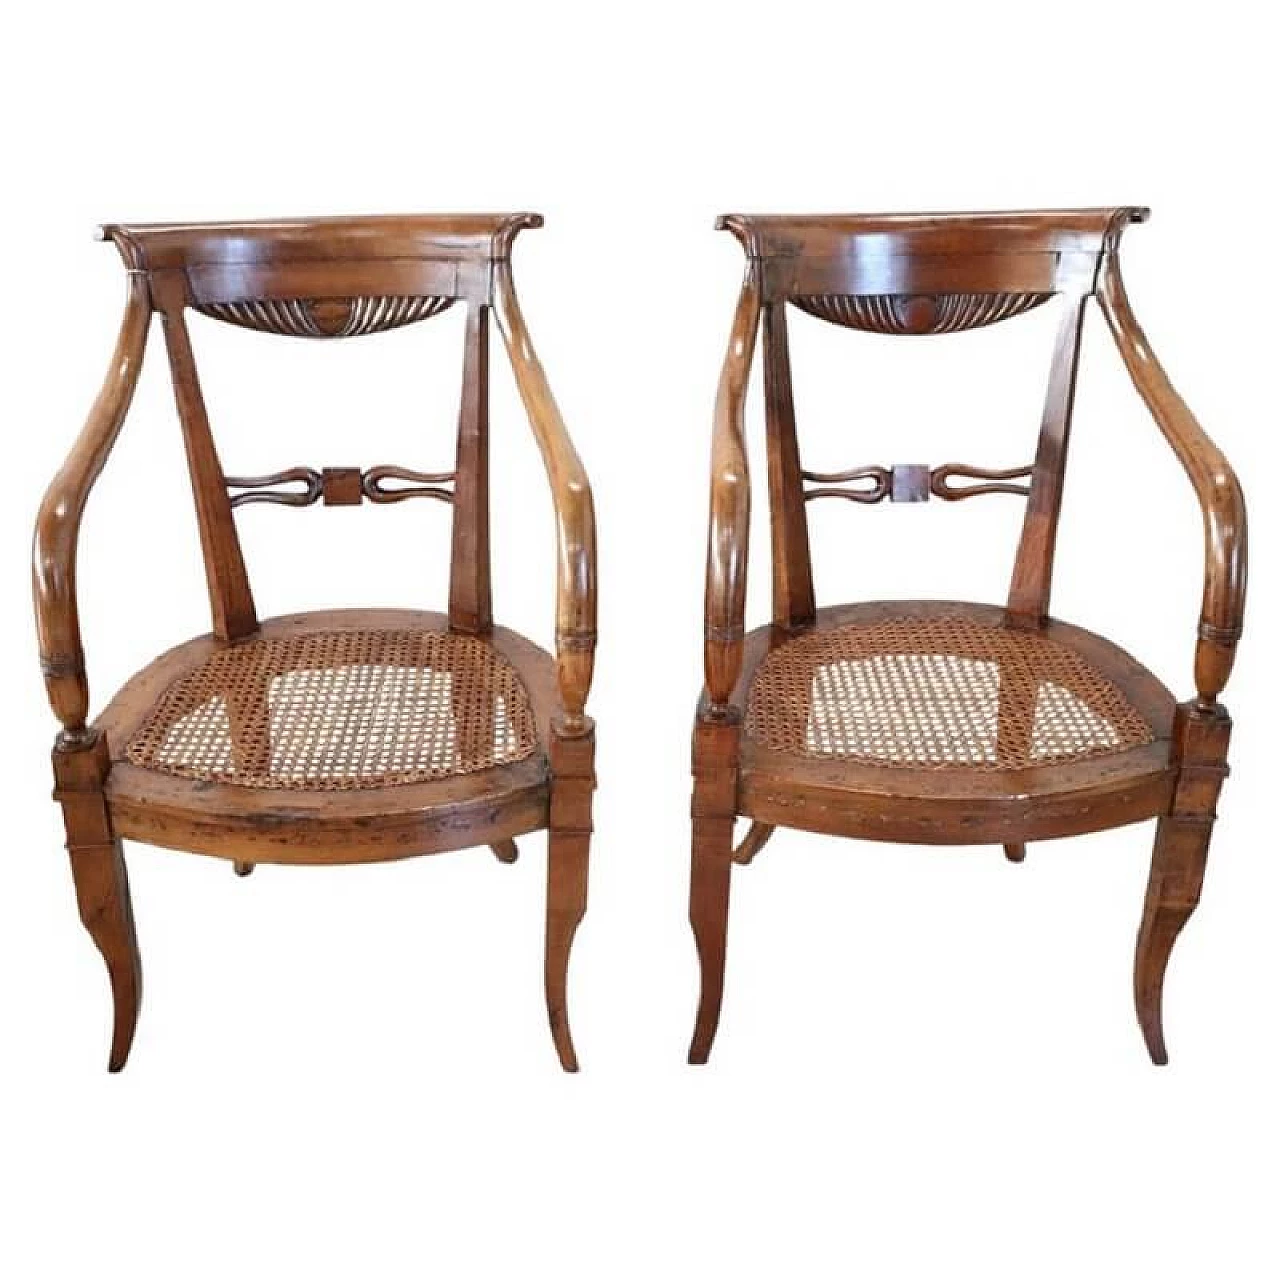 Pair of Direttorio armchairs in walnut and Vienna straw, late 18th century 1